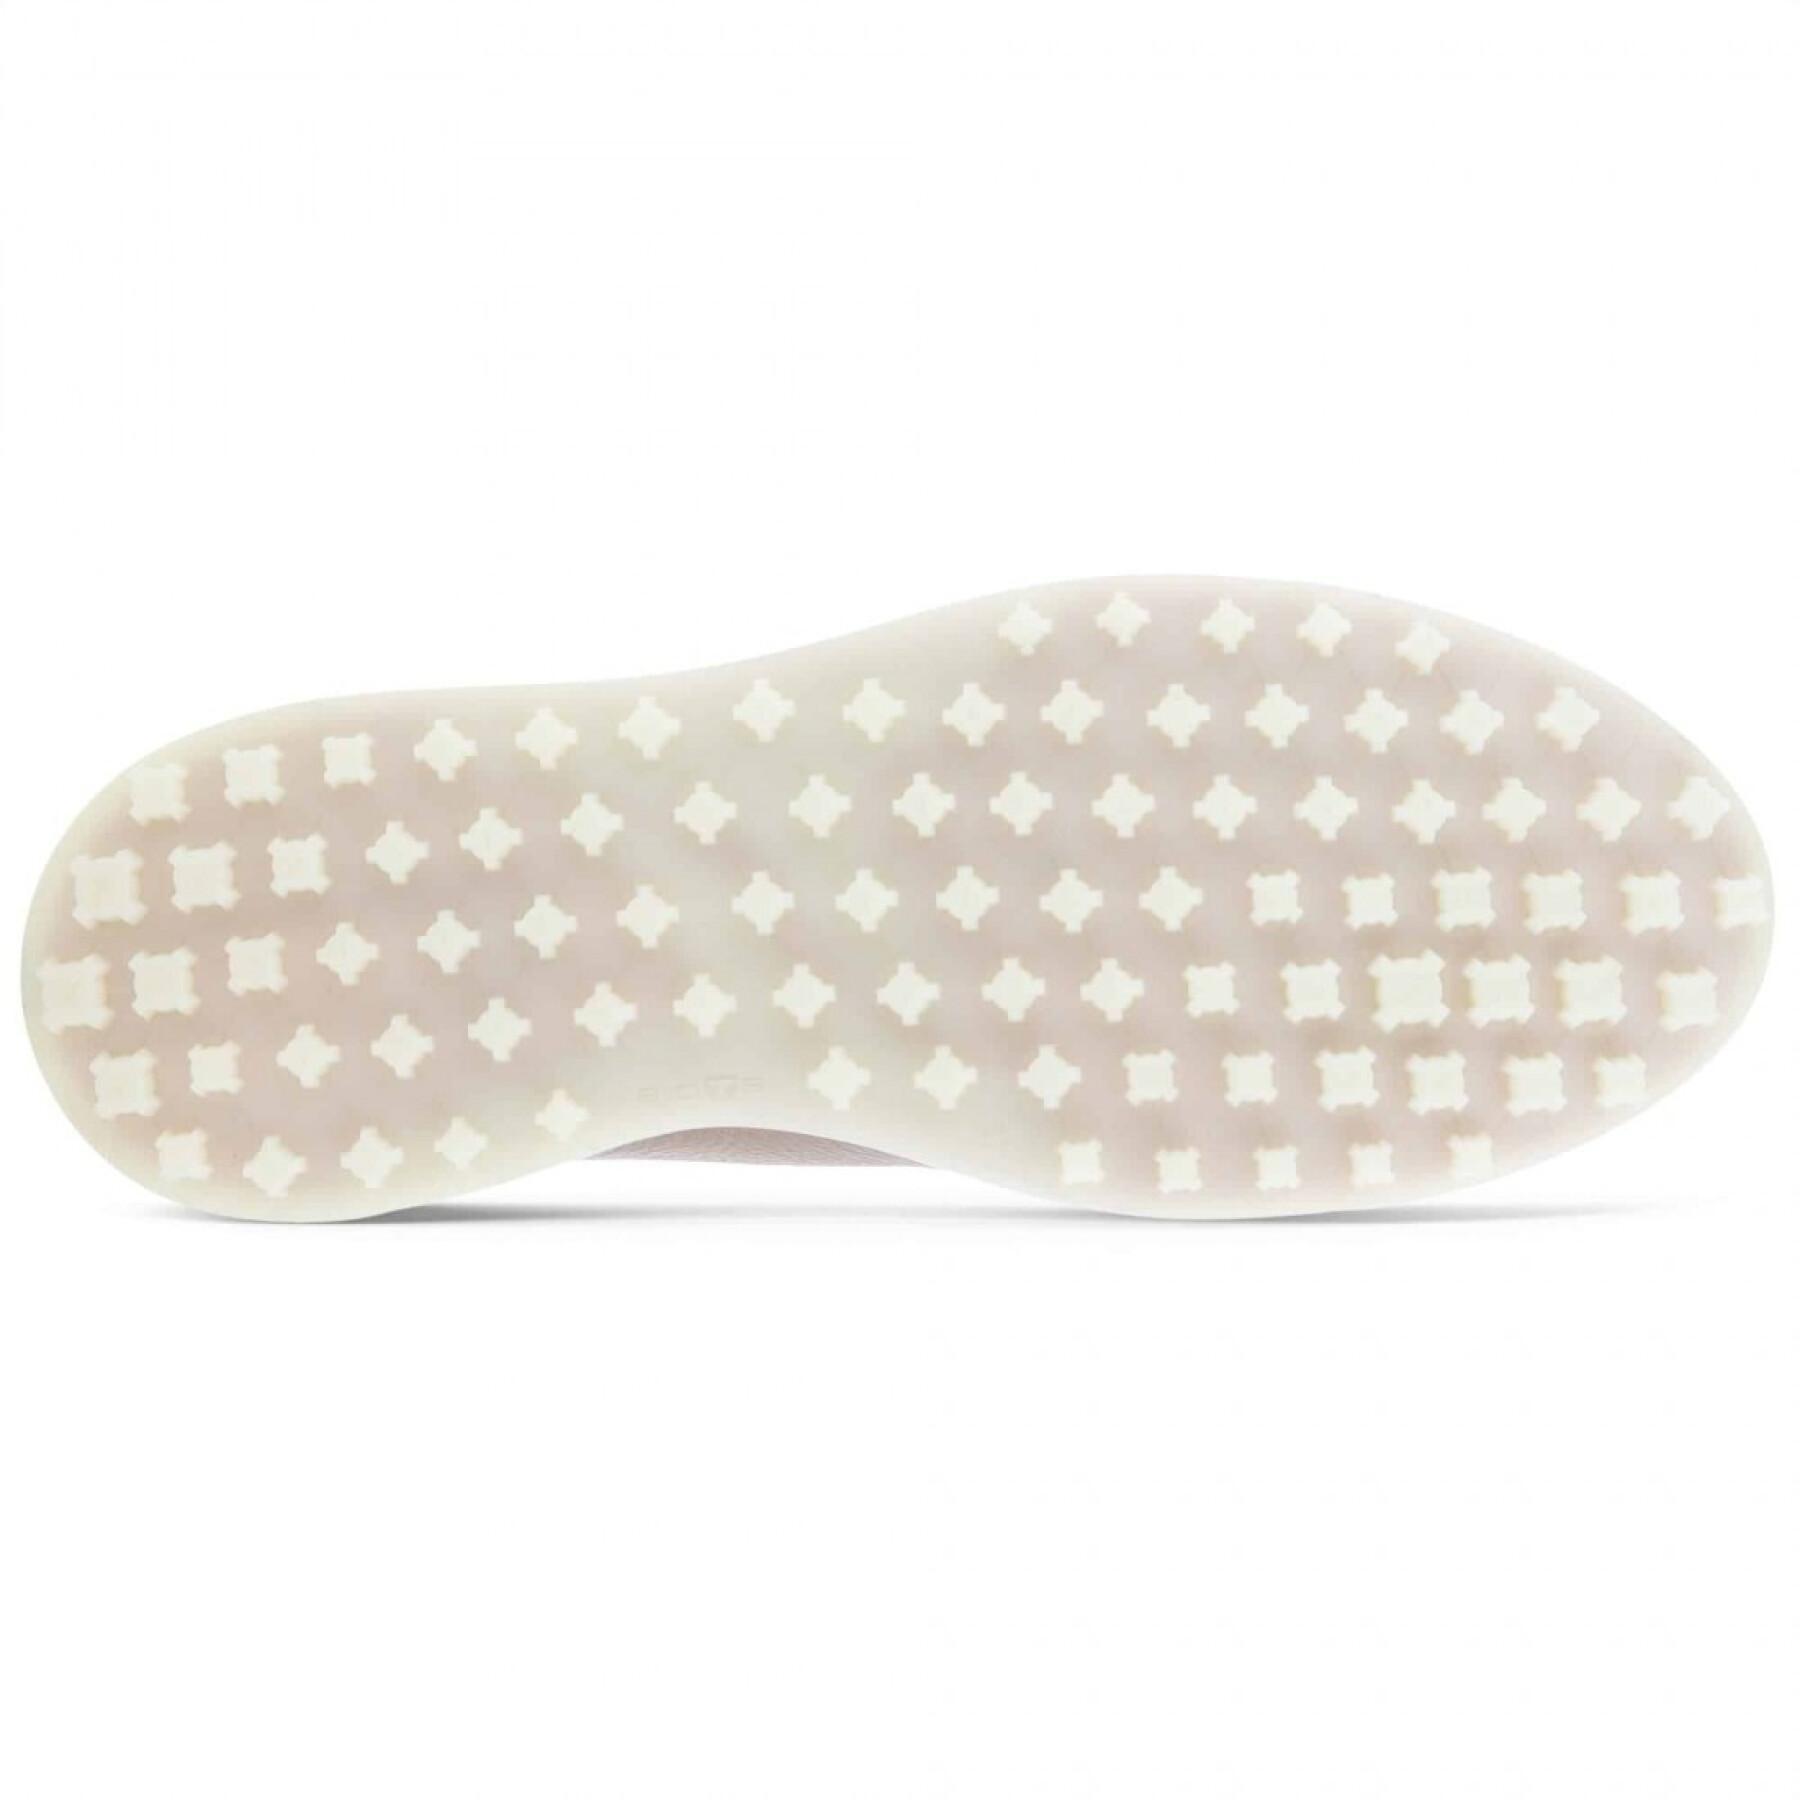 Women's spikeless golf shoes Ecco Tray